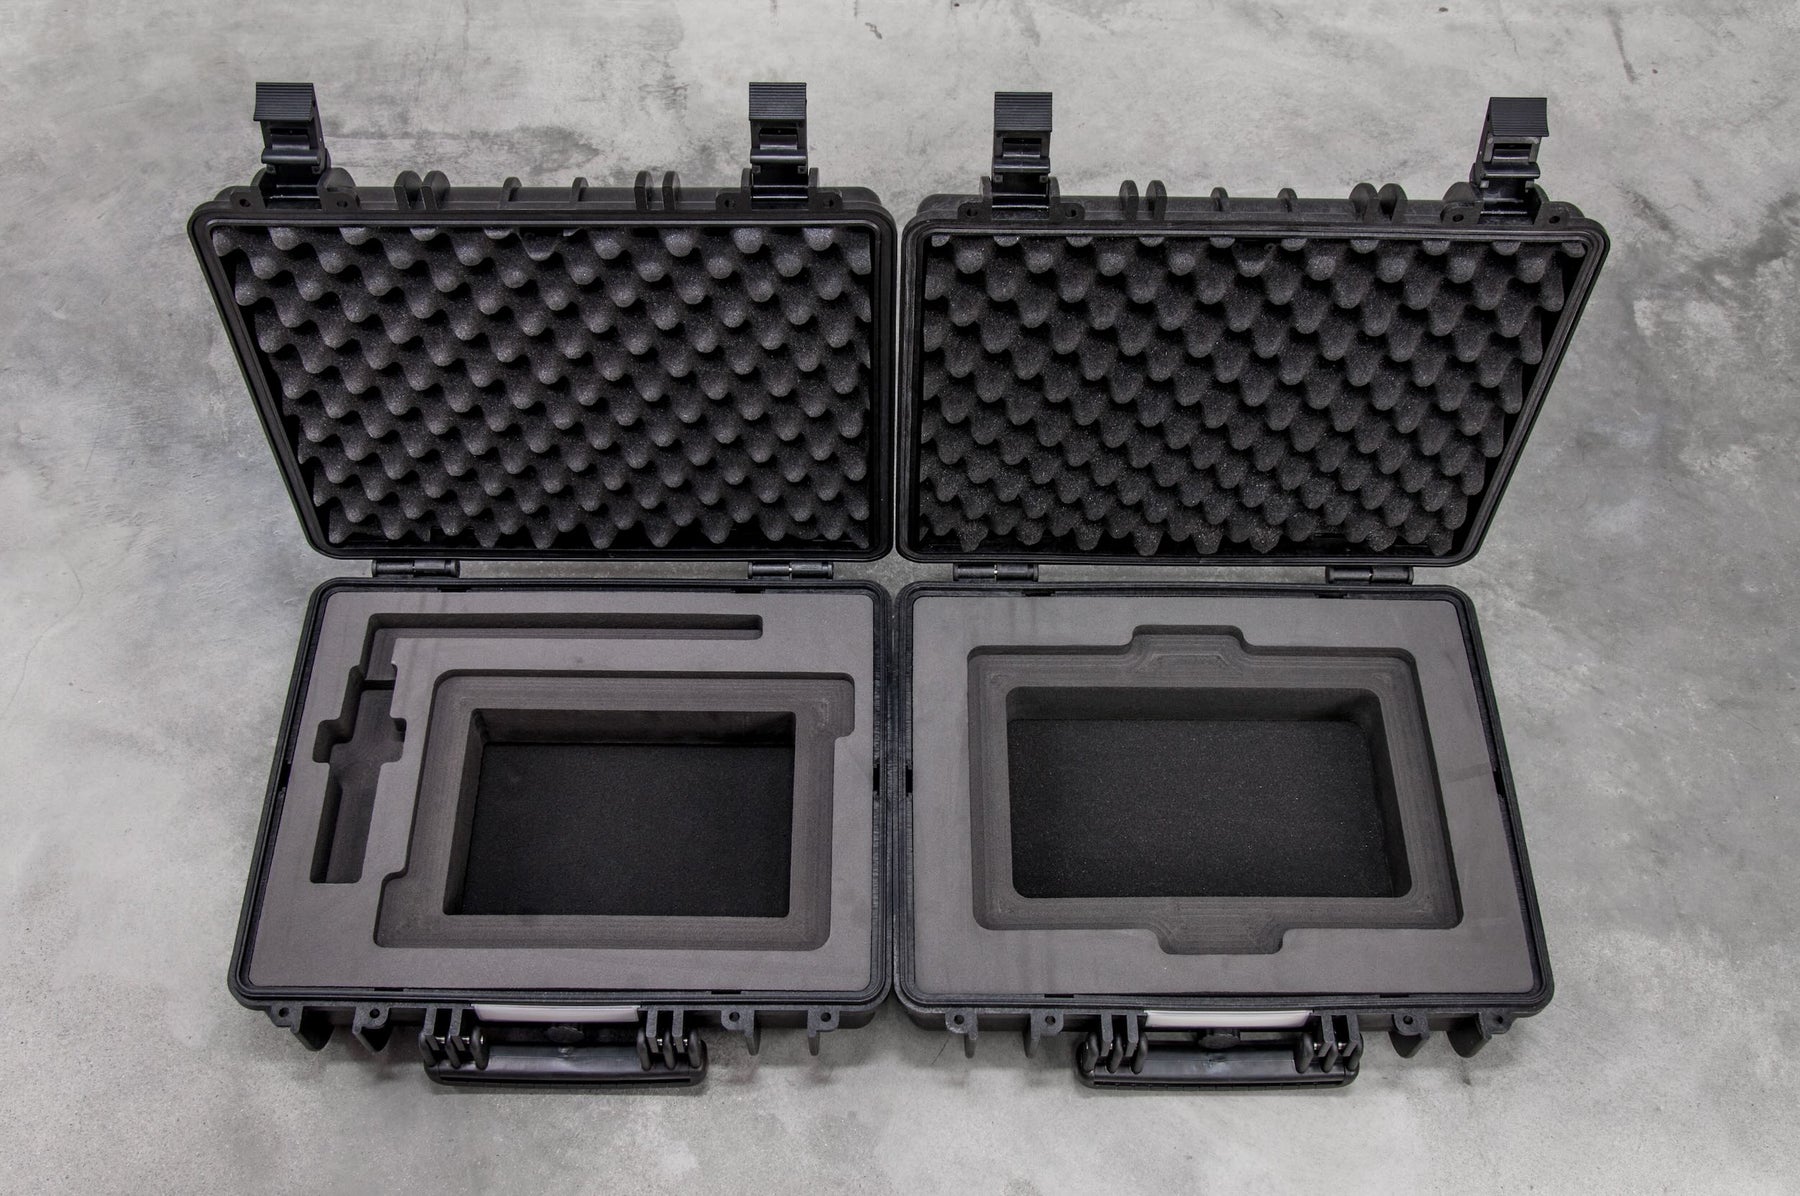 Heavy-Duty Protective Rolling Case with Customizable Foam Insert